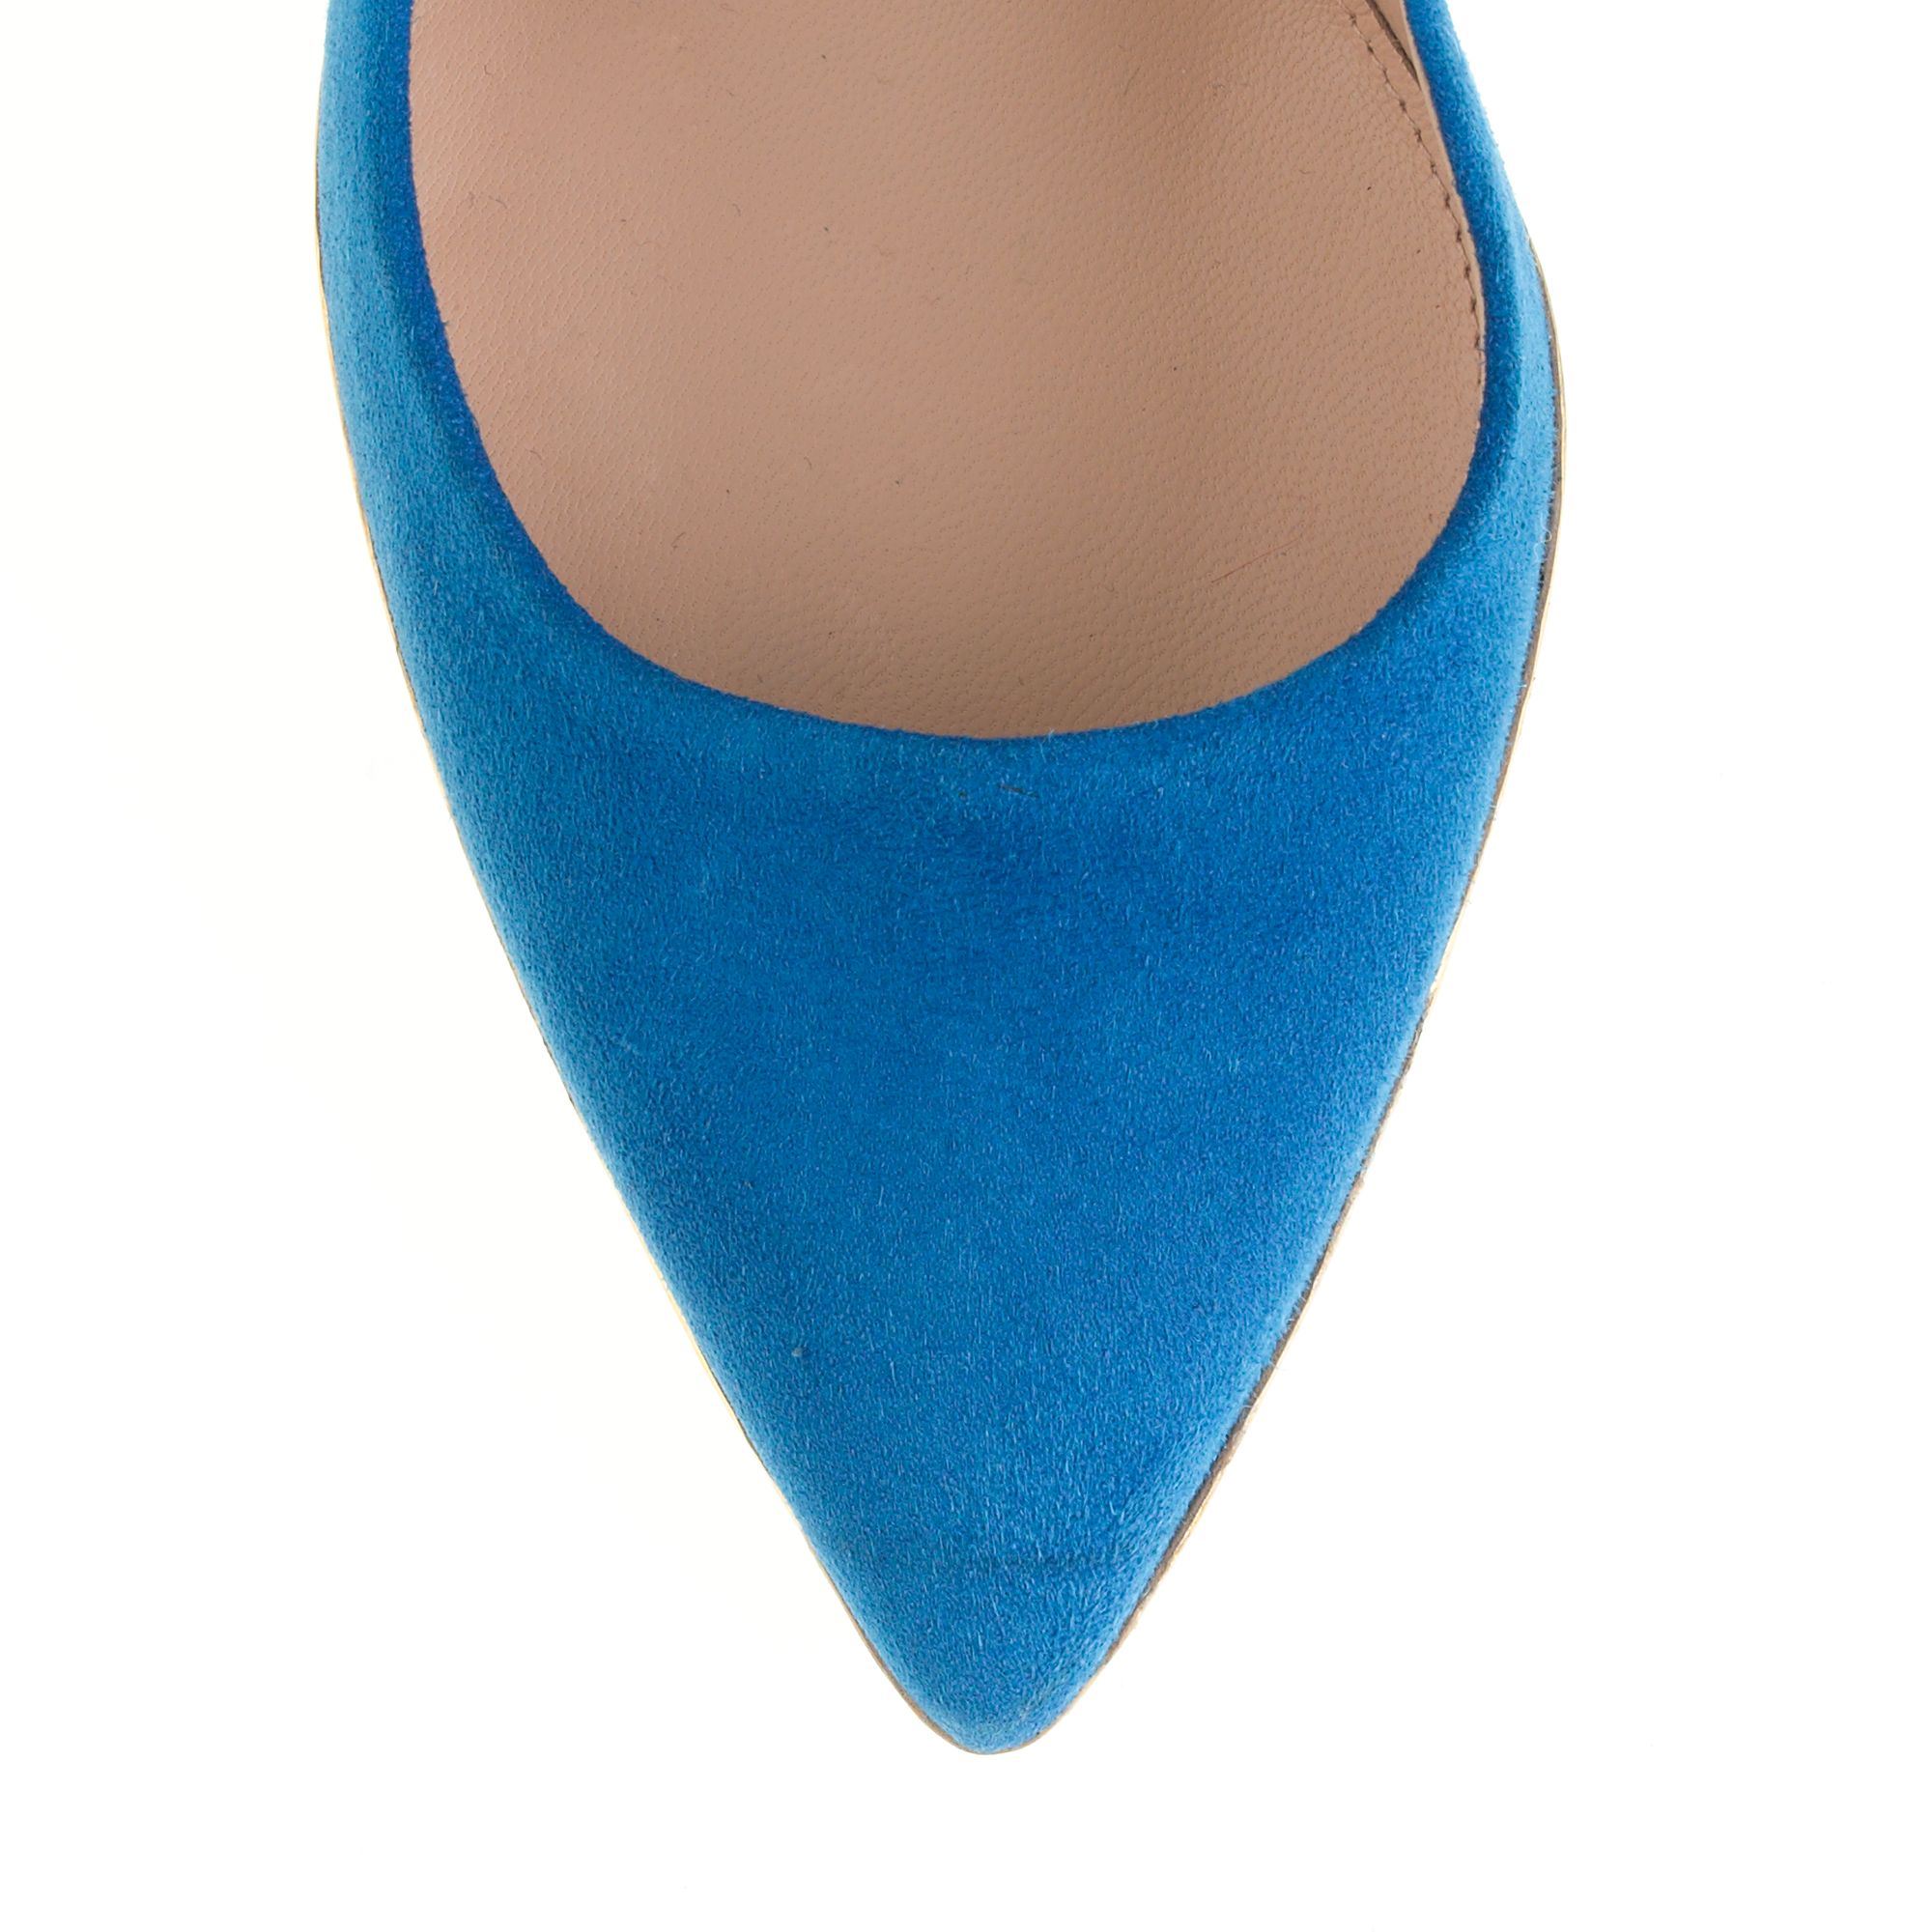 J.crew Everly Suede Metallictrim Pumps in Blue | Lyst